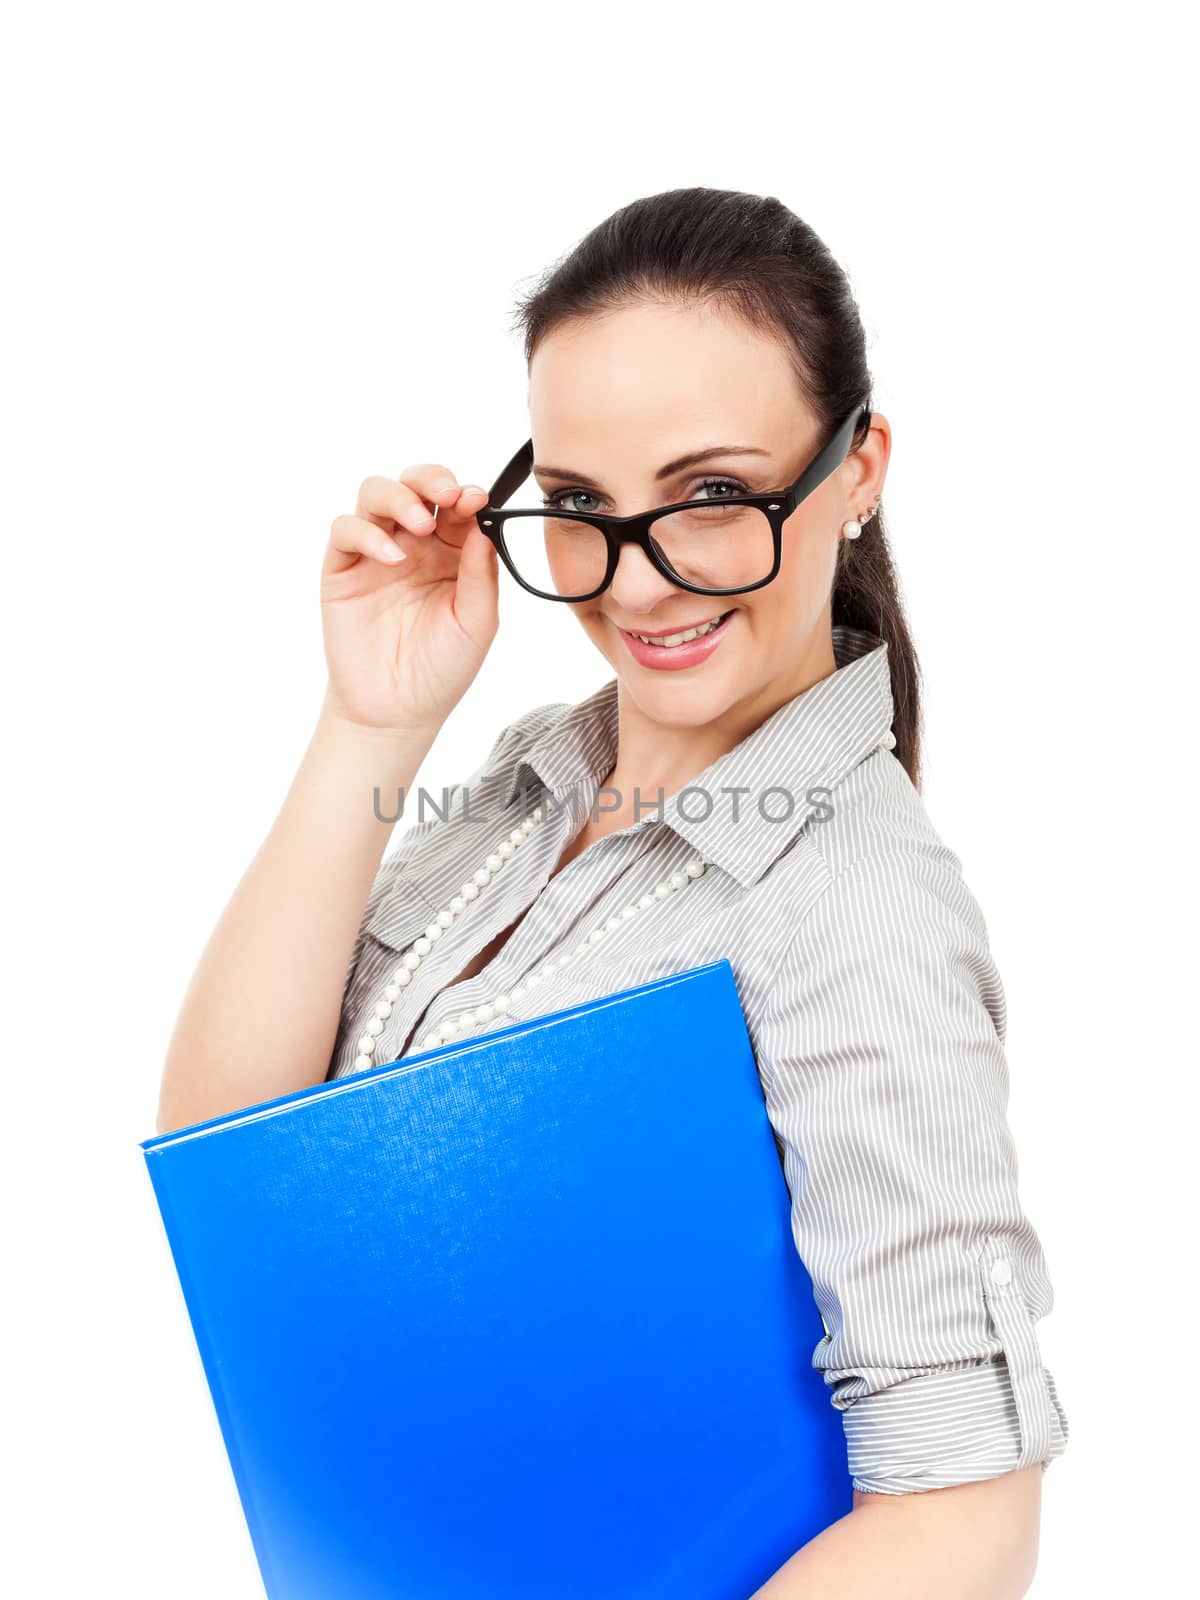 An image of a business woman with a blue folder